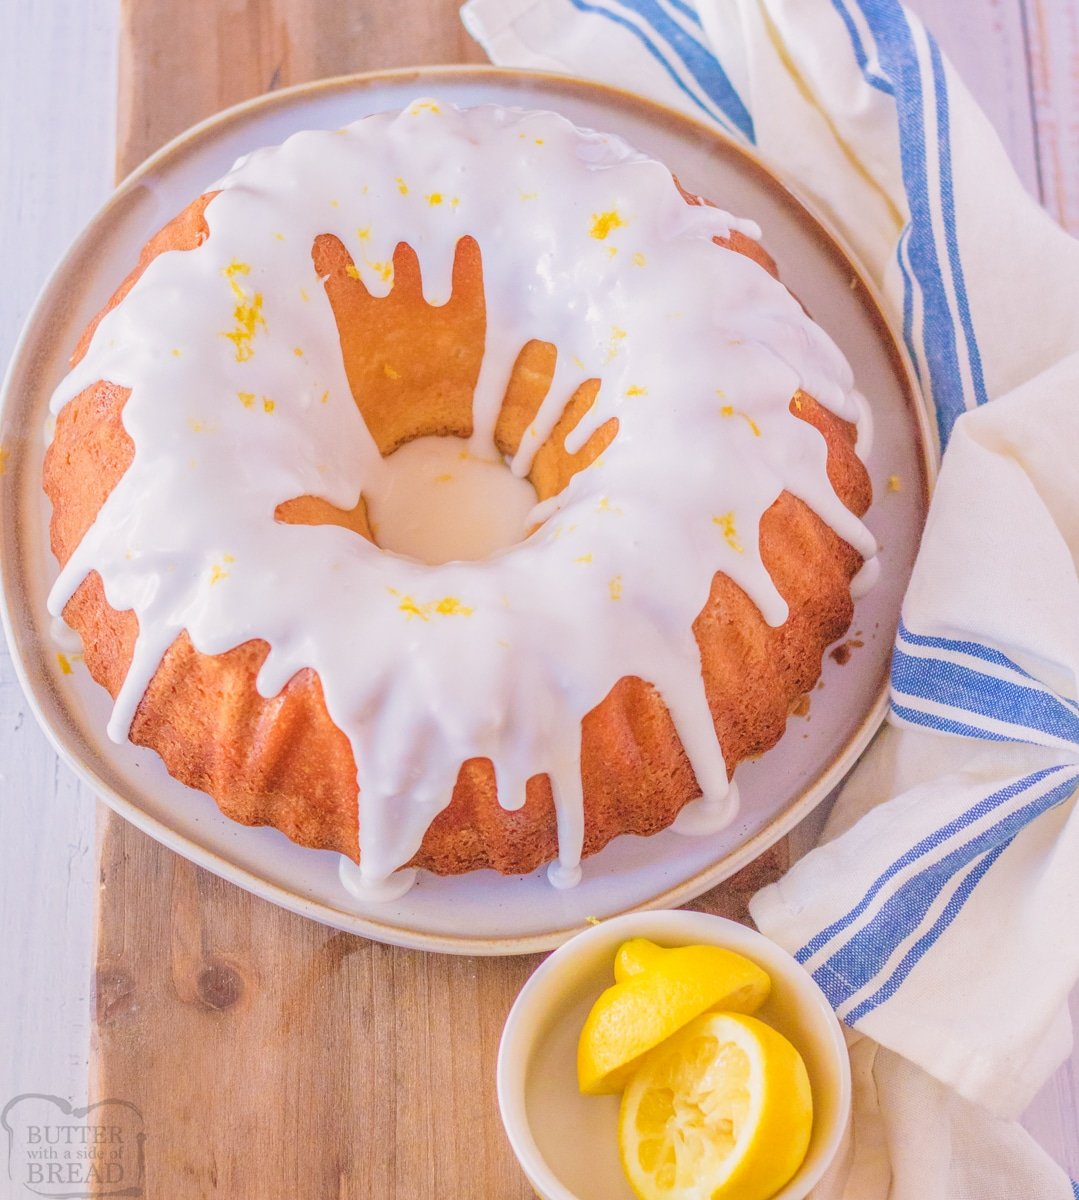 pound cake with icing  and lemons on the side